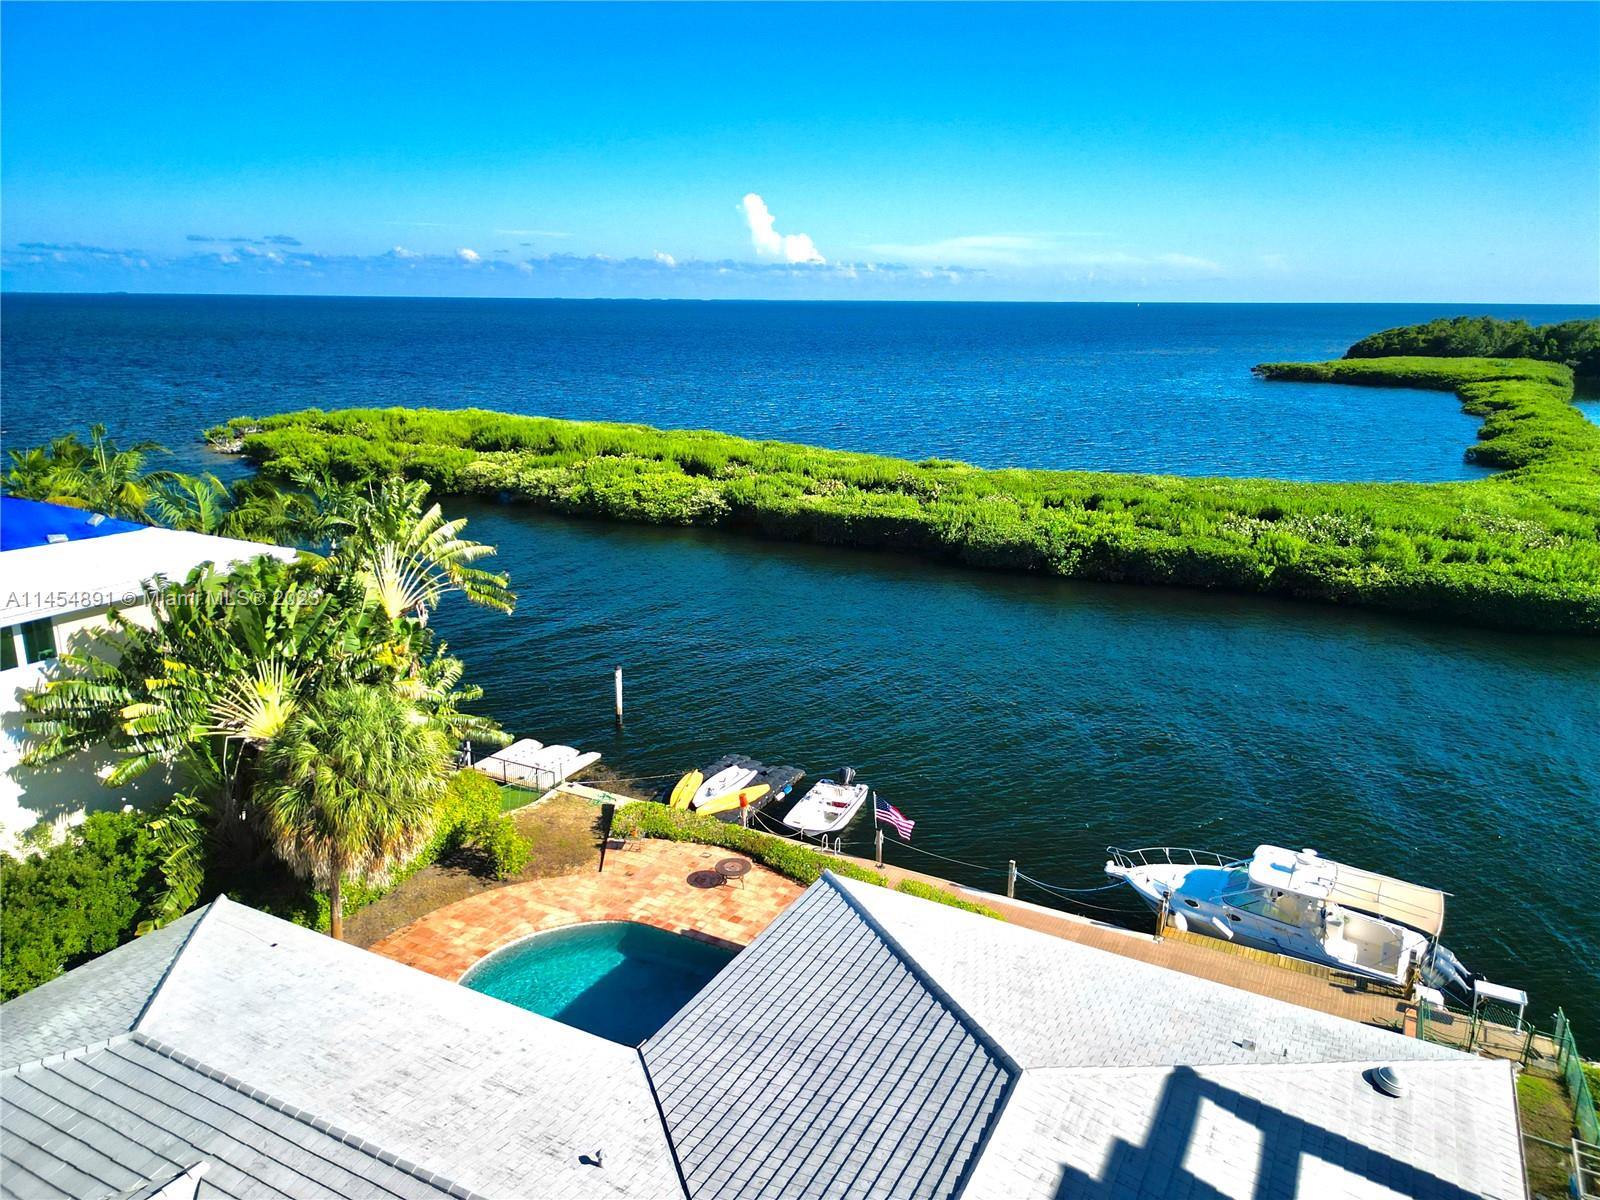 Do not miss this rare opportunity to purchase property on the bayfront “golden corner” of Gables by the Sea.  This 12,000 square foot lot features 100 feet of seawall on deep water.  When you have built your dream house on this property you will have spectacular wide views of Biscayne Bay.  Spot Fowey lighthouse and Soldier key on the horizon.  Have coffee with golden sunrises and watch spectacular evening light shows from distant thunderstorms.  Watch the tarpon roll from your backyard while manatees swim by.  You will have amazing bay views yet your yacht and property will be protected from storms by a low mangrove breakwater (see photos).  Leave your dock and you will be out of the channel and up at full speed in less than 3 minutes. Endless possibilities!